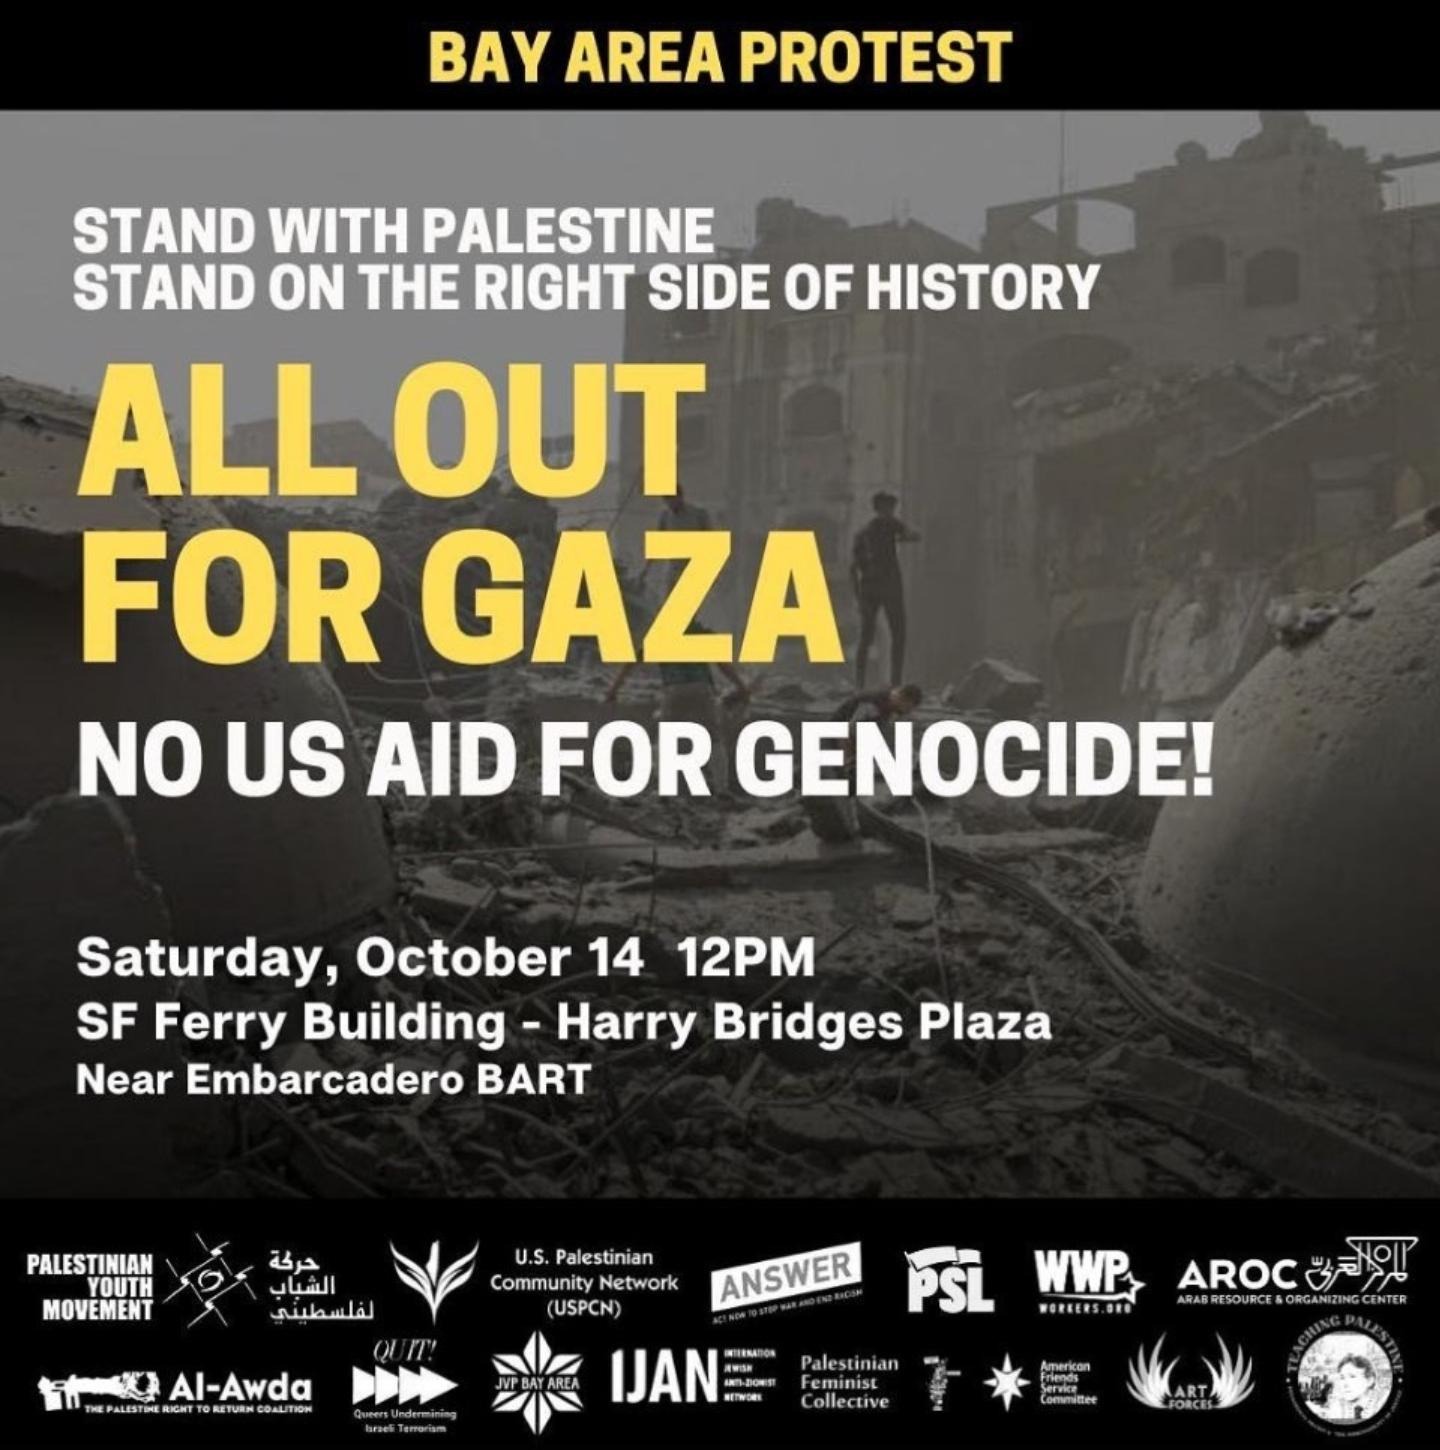 Graphic detailing the time, date, and location of a protest
taking place demanding an end to the genocide taking place in Gaza.
The aforementioned details are included near the beginning of this
email